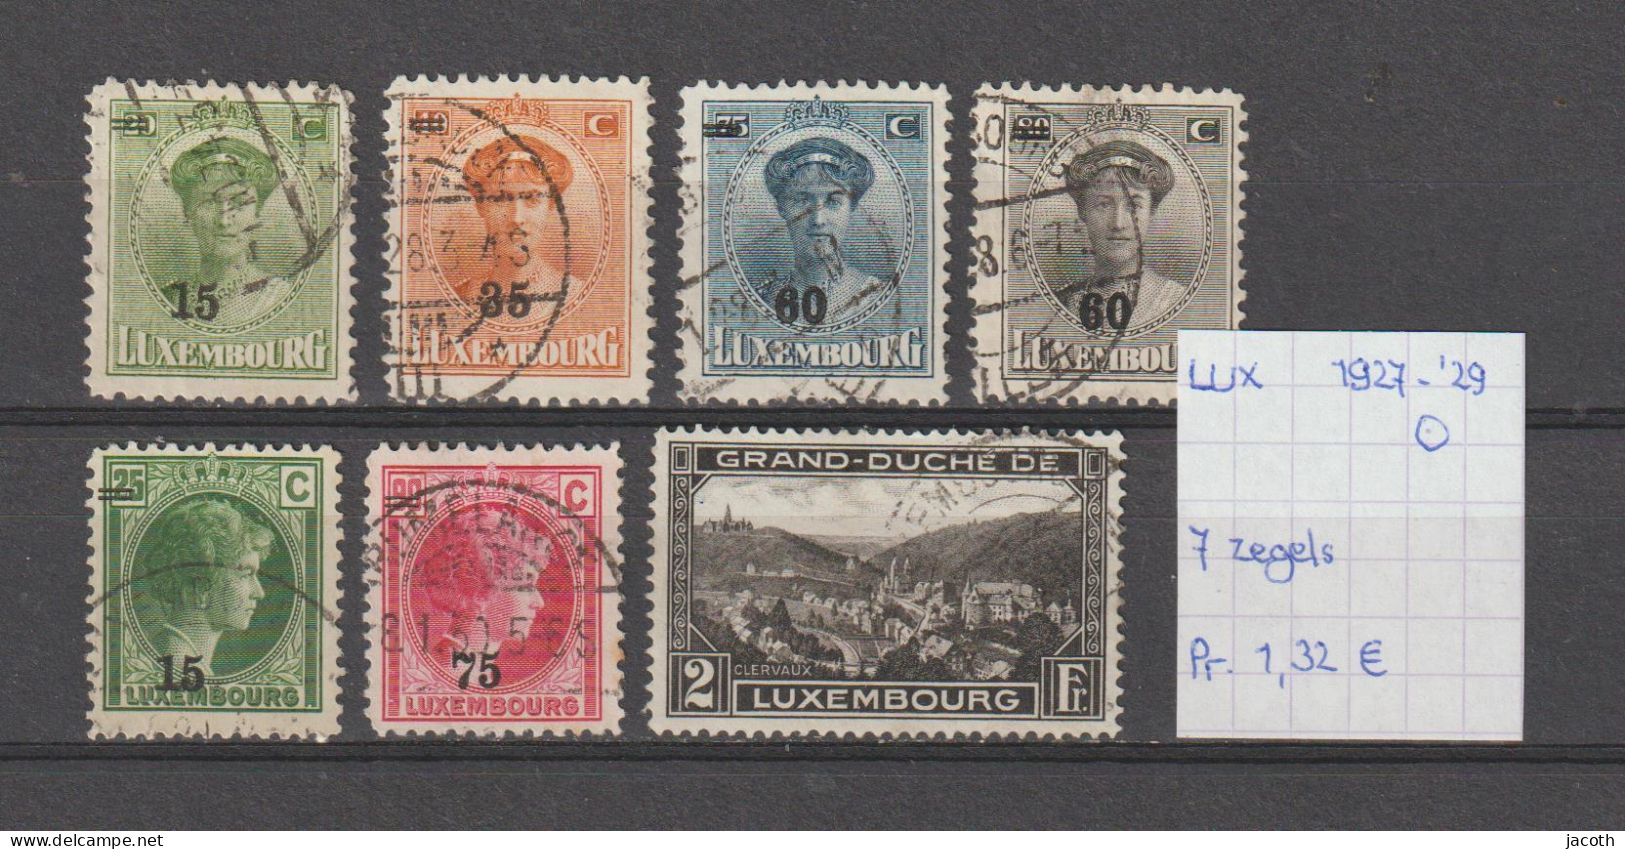 (TJ) Luxembourg 1927-29 - 7 Zegels (gest./obl./used) - Usados